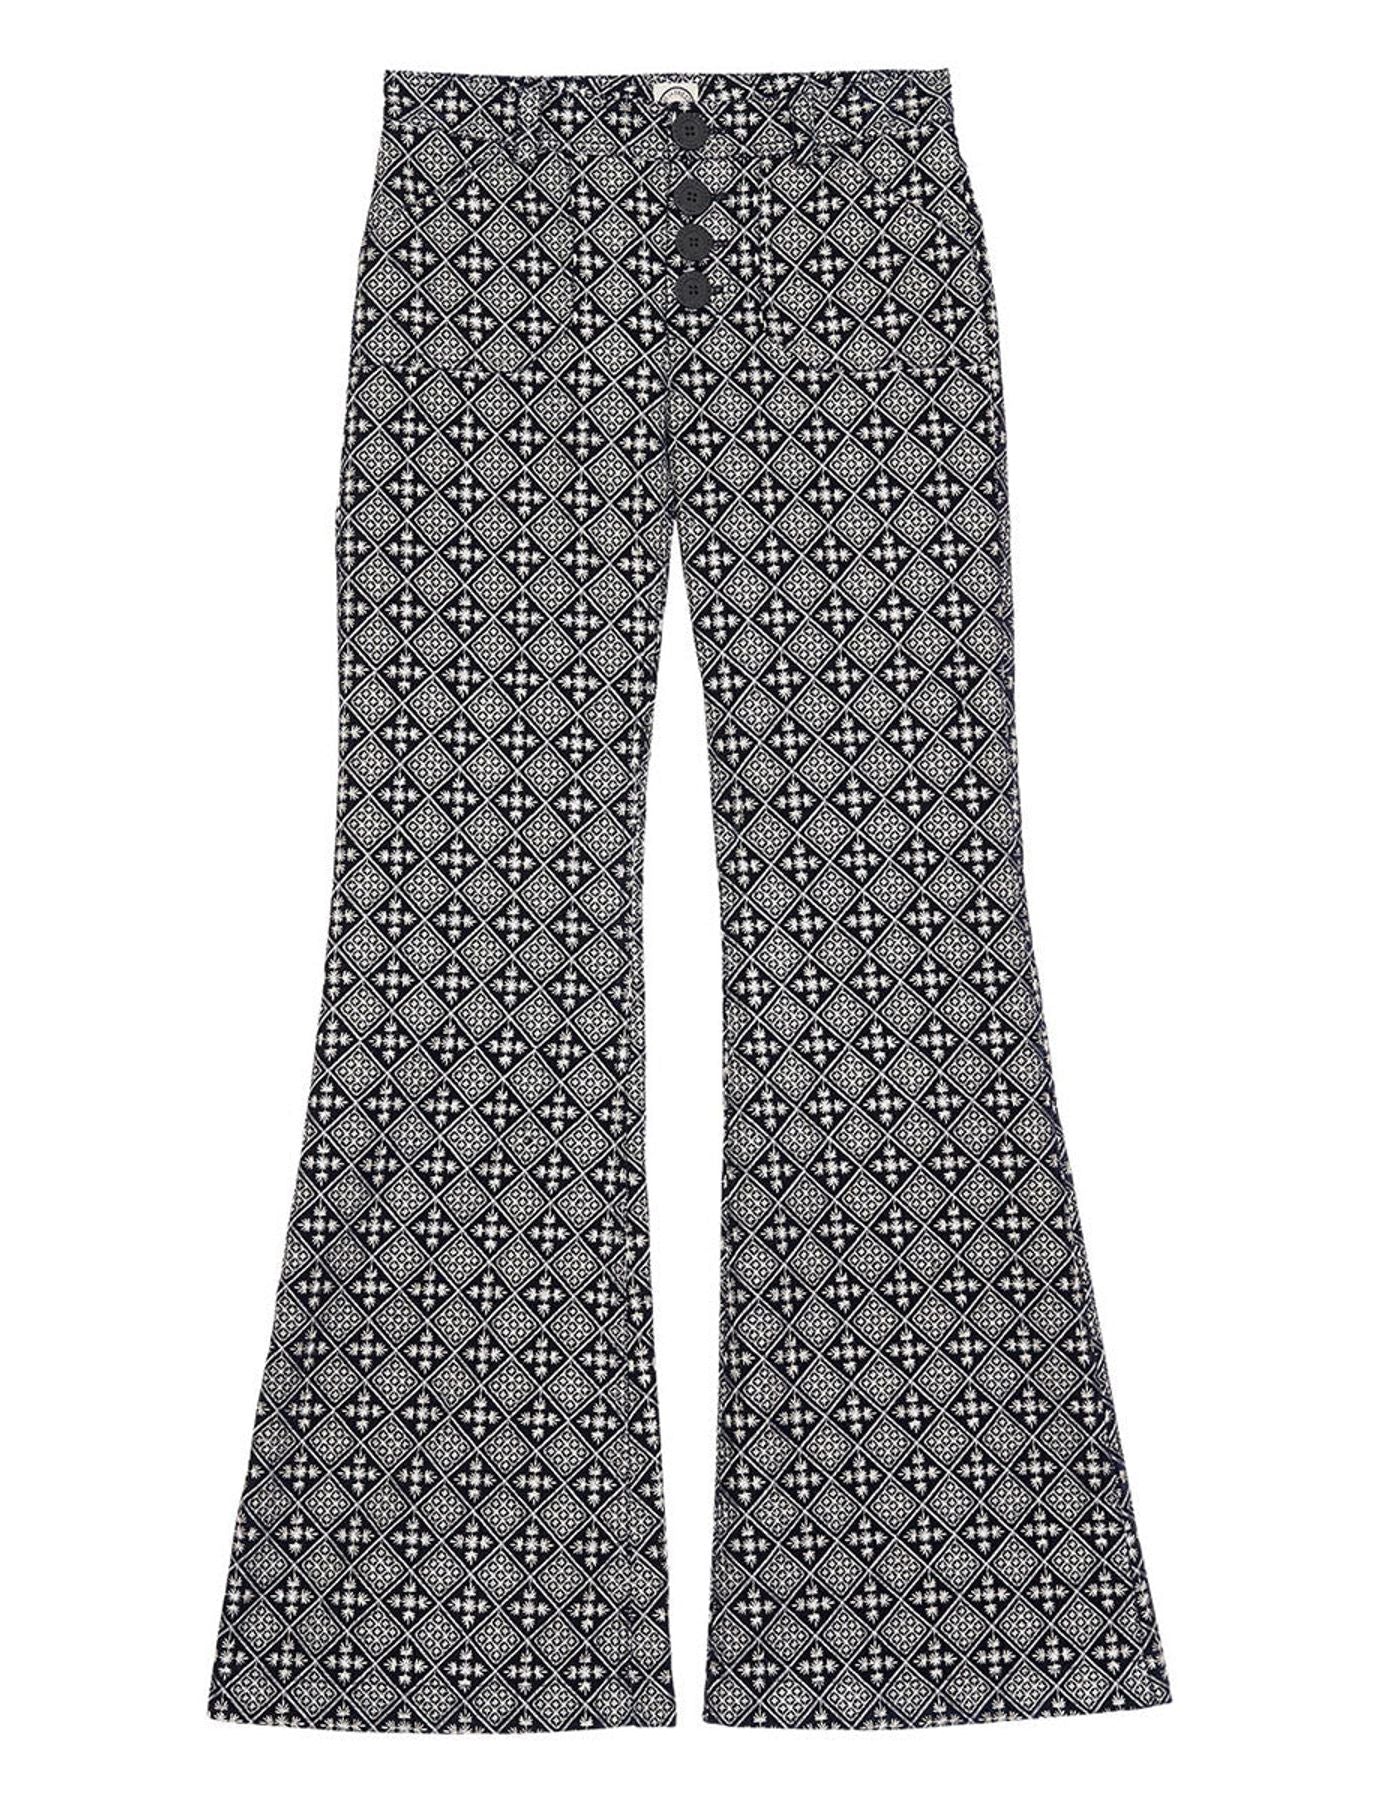 trousers-charlotte-imprint-blue-and-white